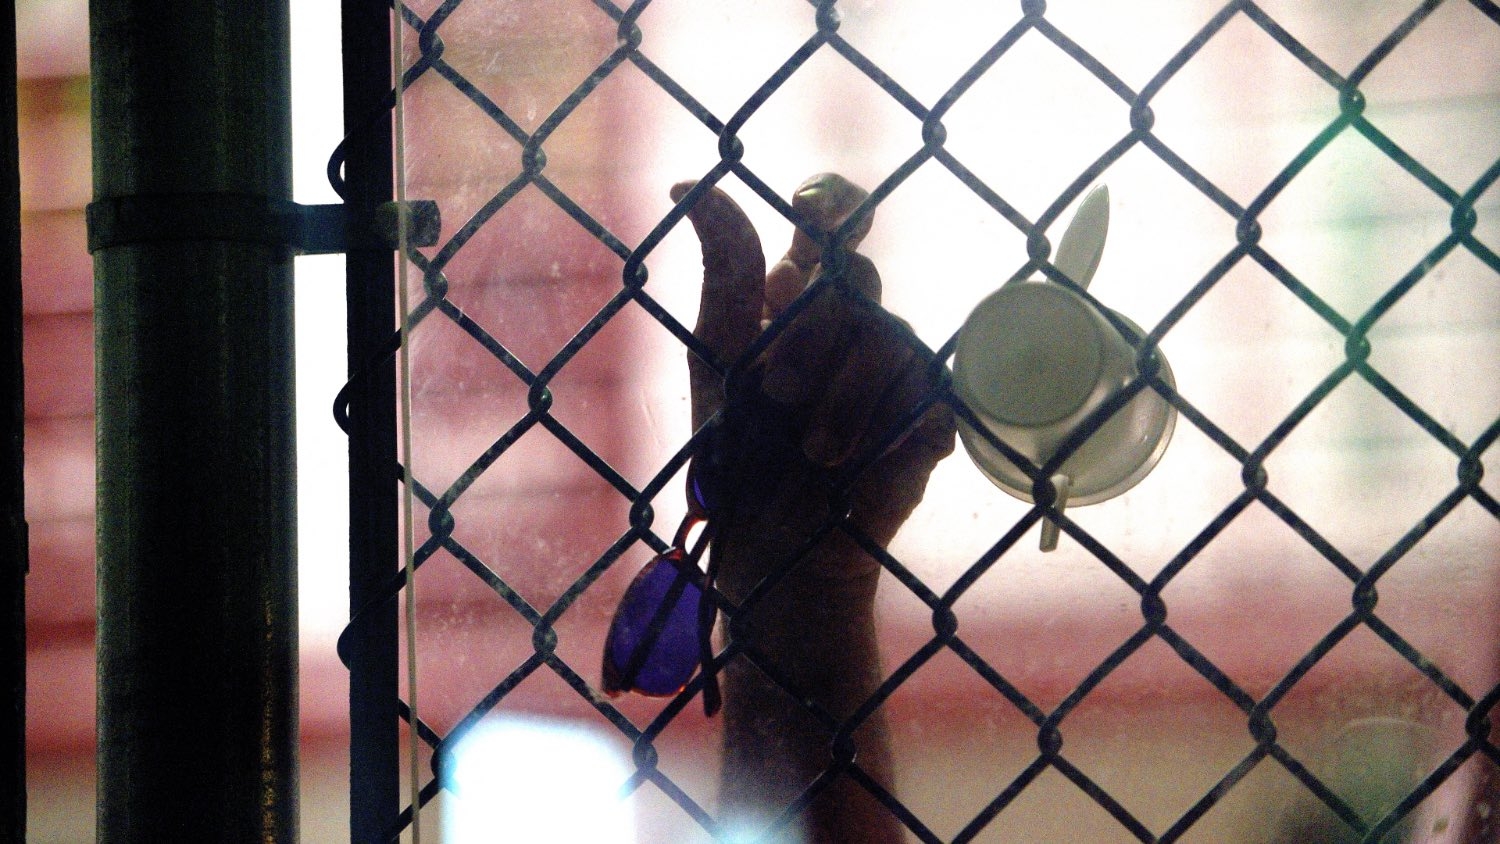 The hand of an unidentified detainee at "Camp 6" detention facility at the US Naval Station in Guantanamo Bay, Cuba, on 8 April 2014.